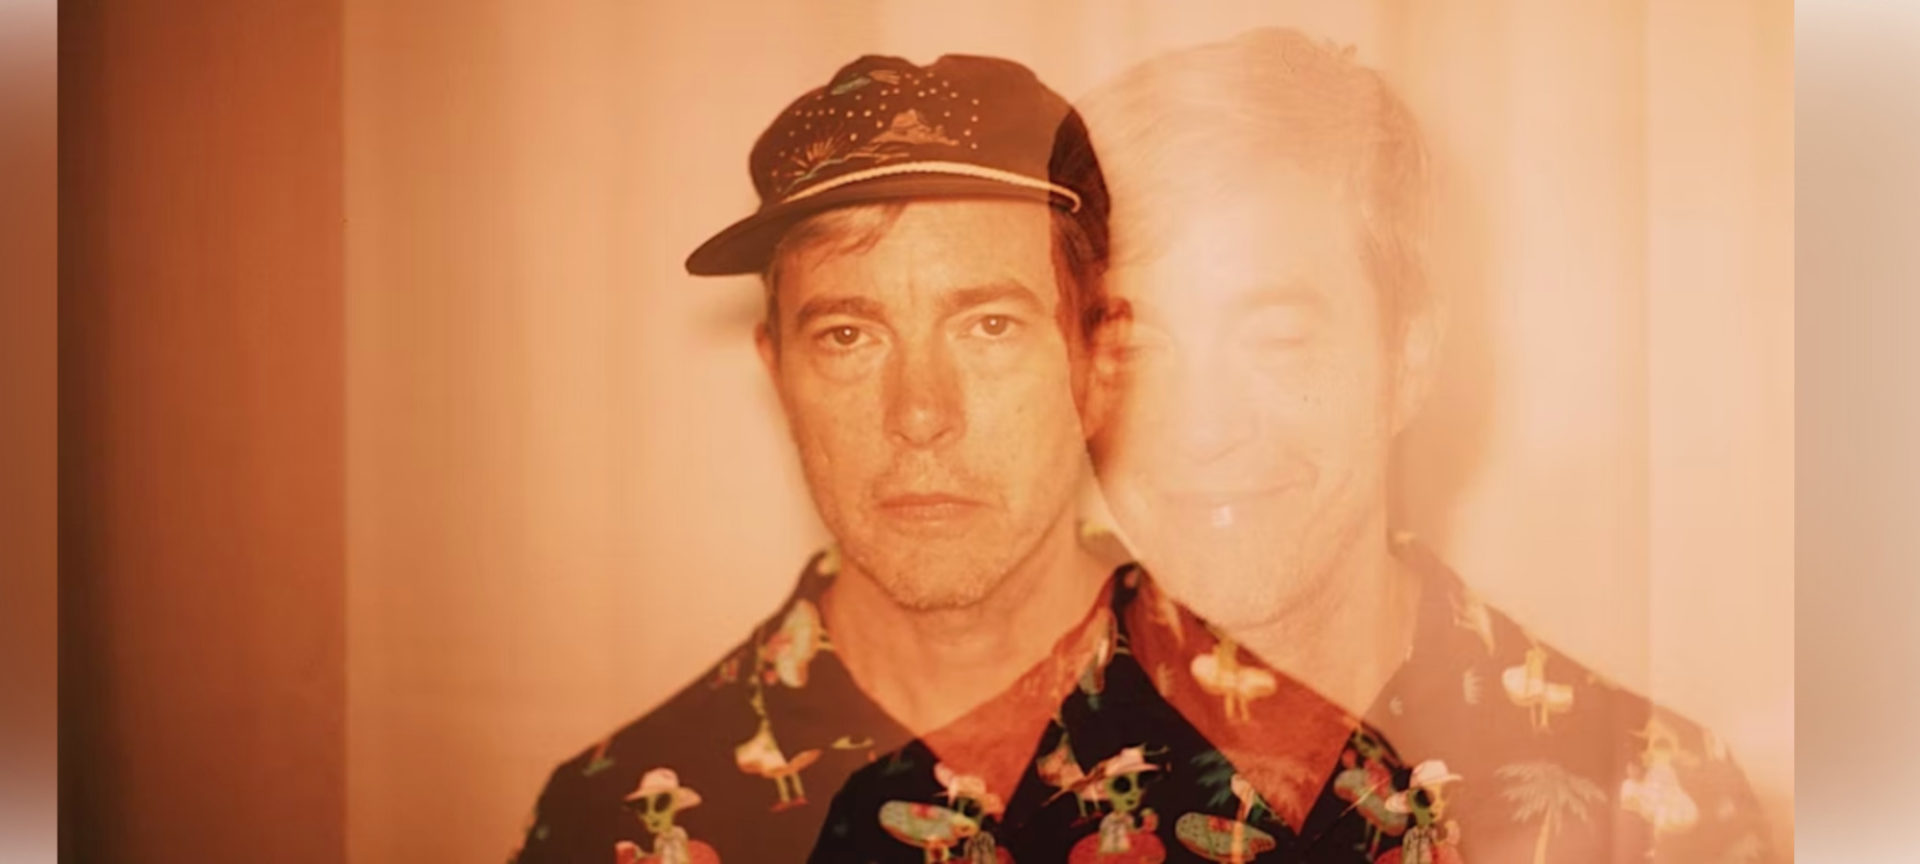 Bill Callahan portrait. He is pictured wearing a dark collared shirt with a bold pattern and a baseball hat. He looks into the camera with a blank expression. There is a ghost image effect that has a faint outline of his face to the right of the in-focus face. That ghost image shows him without a hat, eyes closed, smirking. The image is filtered in a pale orange.